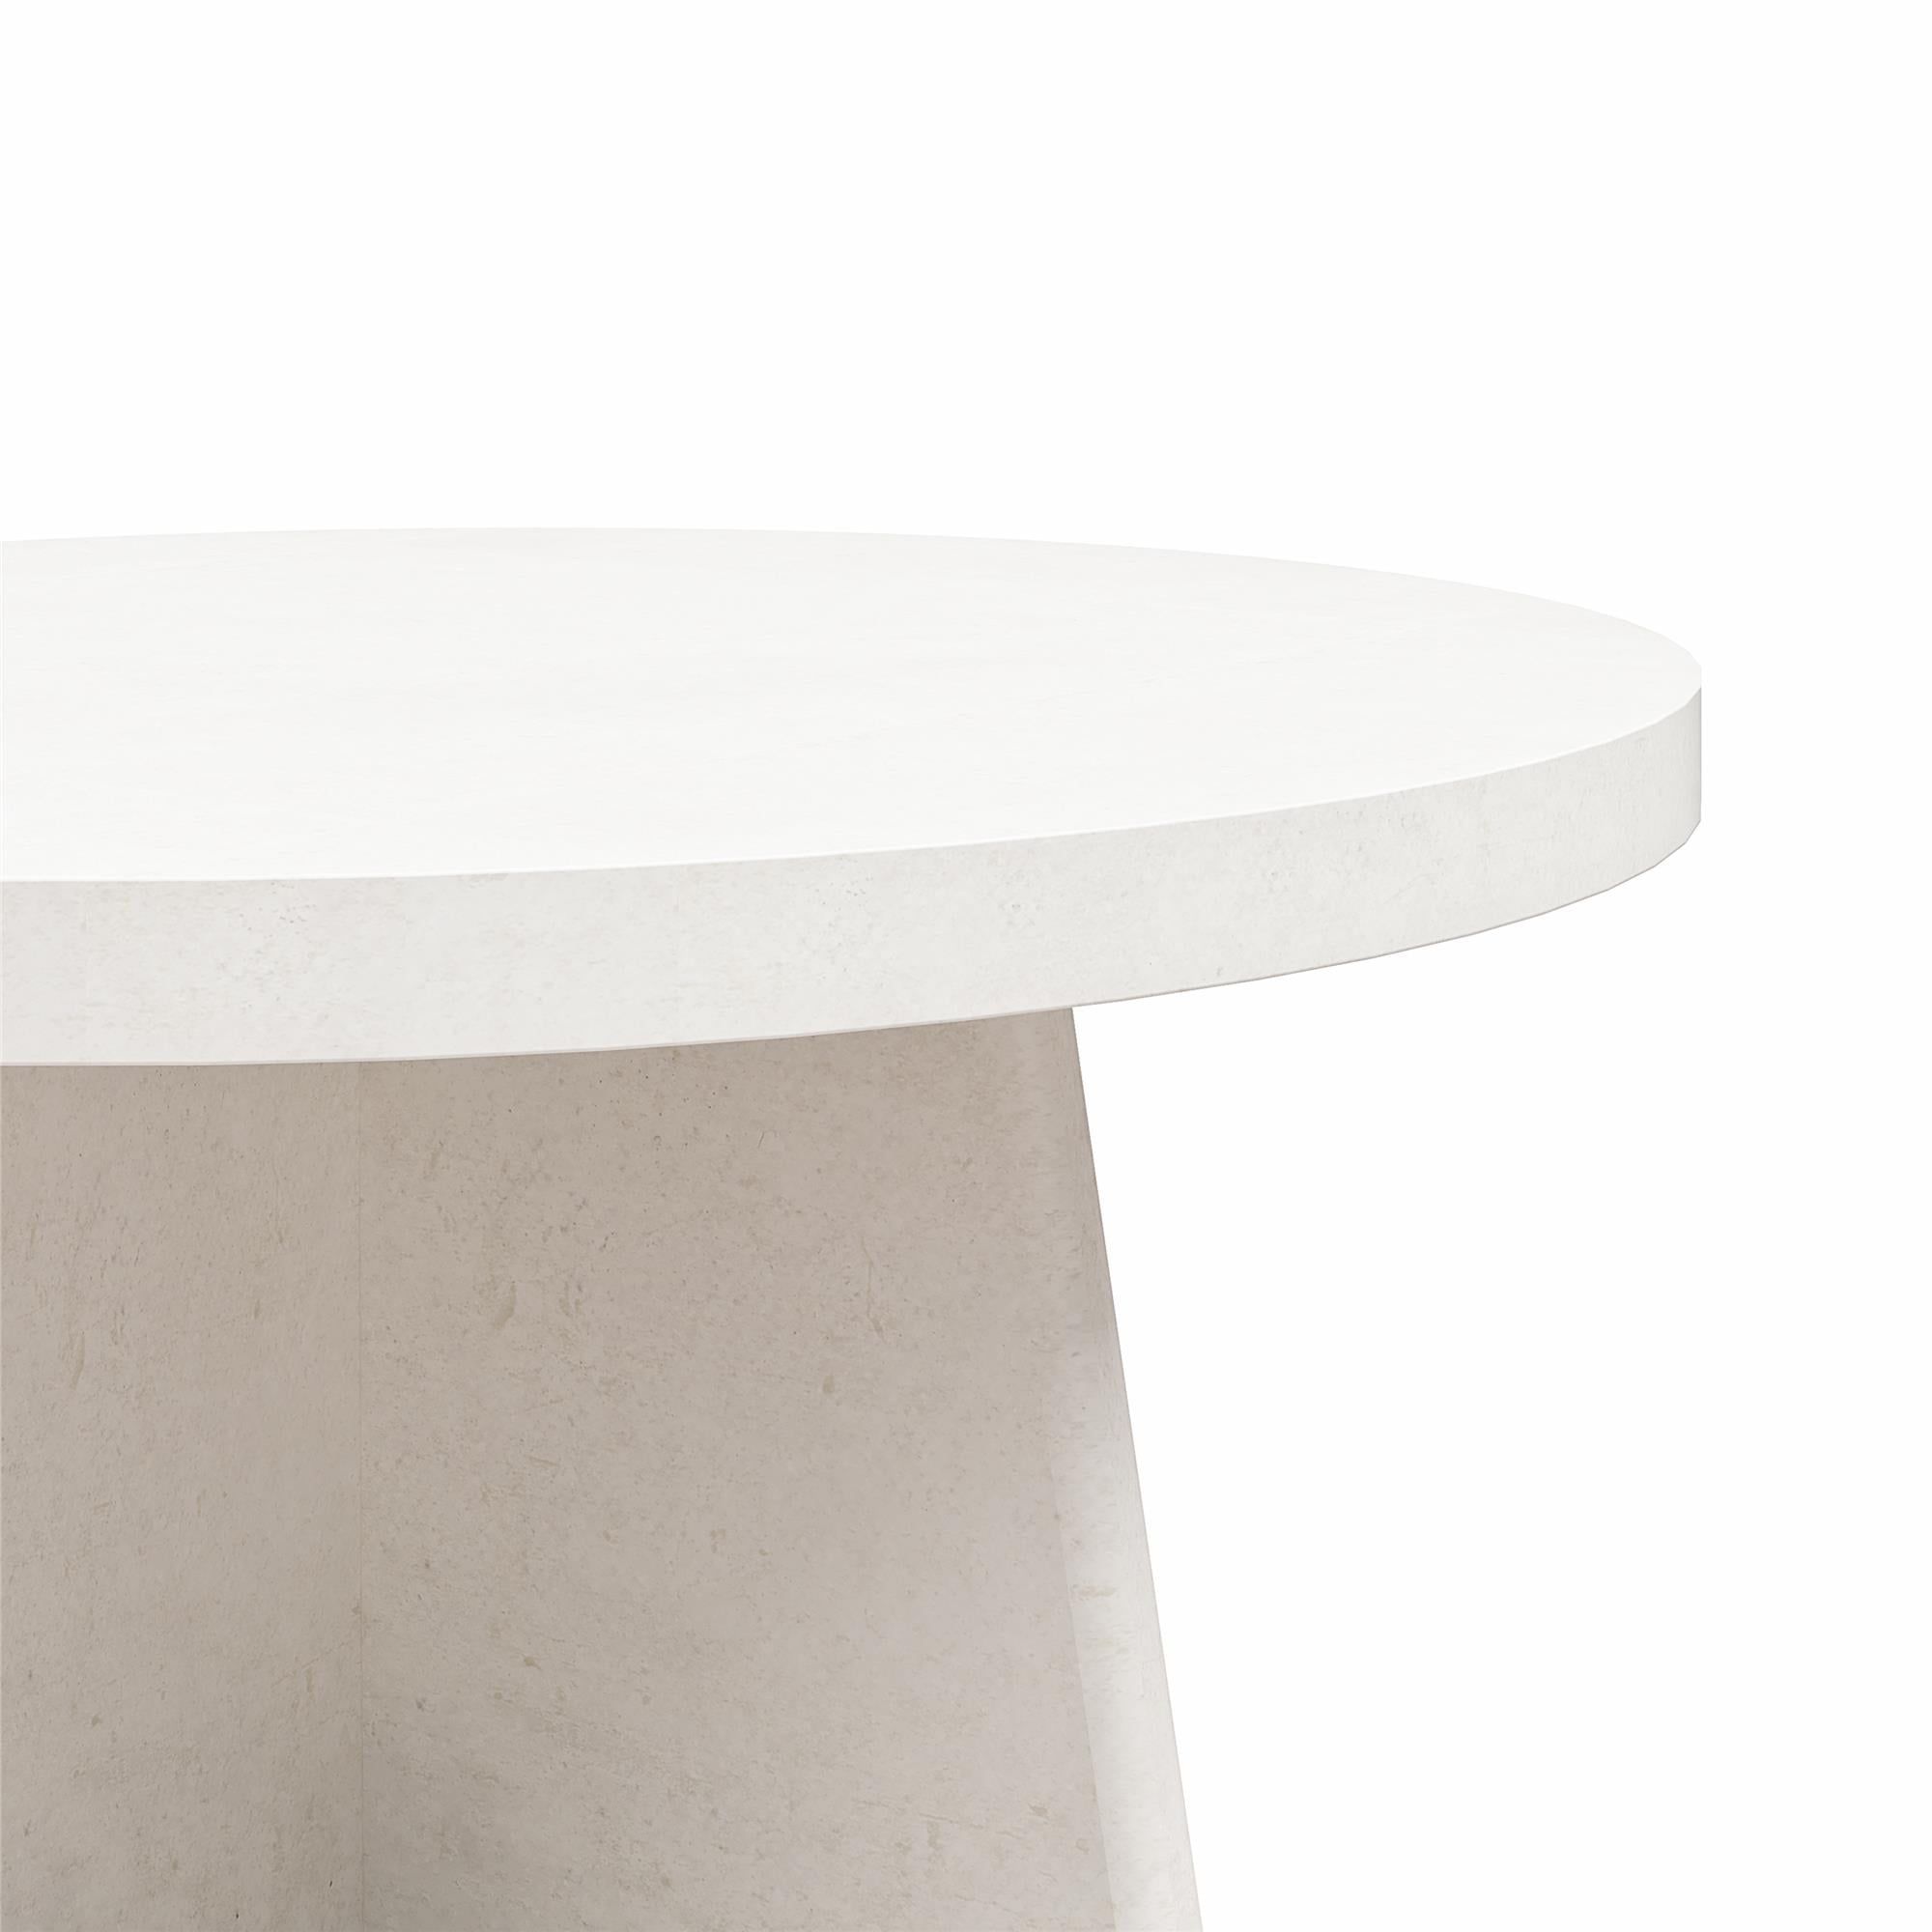 Queer Eye Liam Round Coffee Table, Plaster – Walmart Pertaining To Liam Round Plaster Coffee Tables (Gallery 6 of 20)